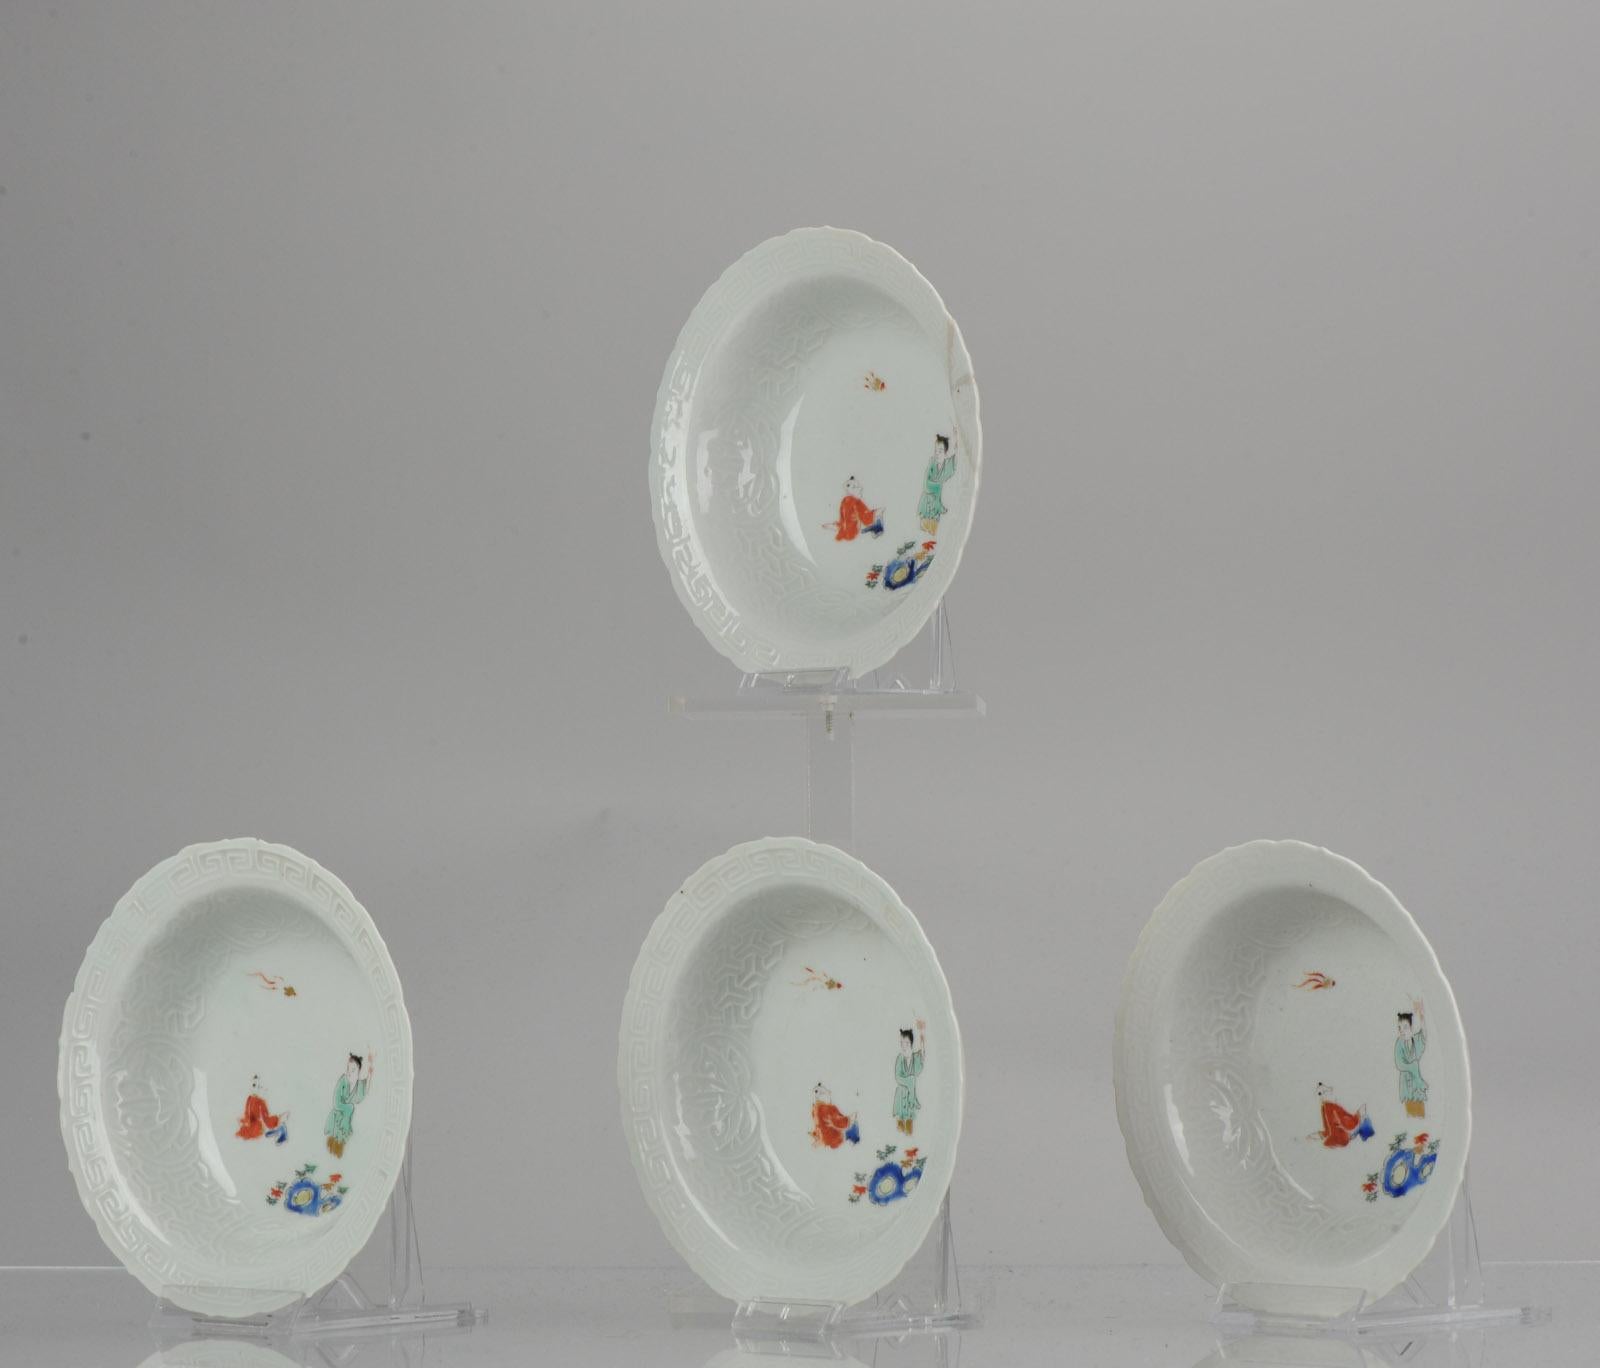 A spectacular set of 4 Kakiemon bowl. Very nice coloring.

Same pieces were auctioned at Rob Michiels in his October auction;
https://live. rm-auctions